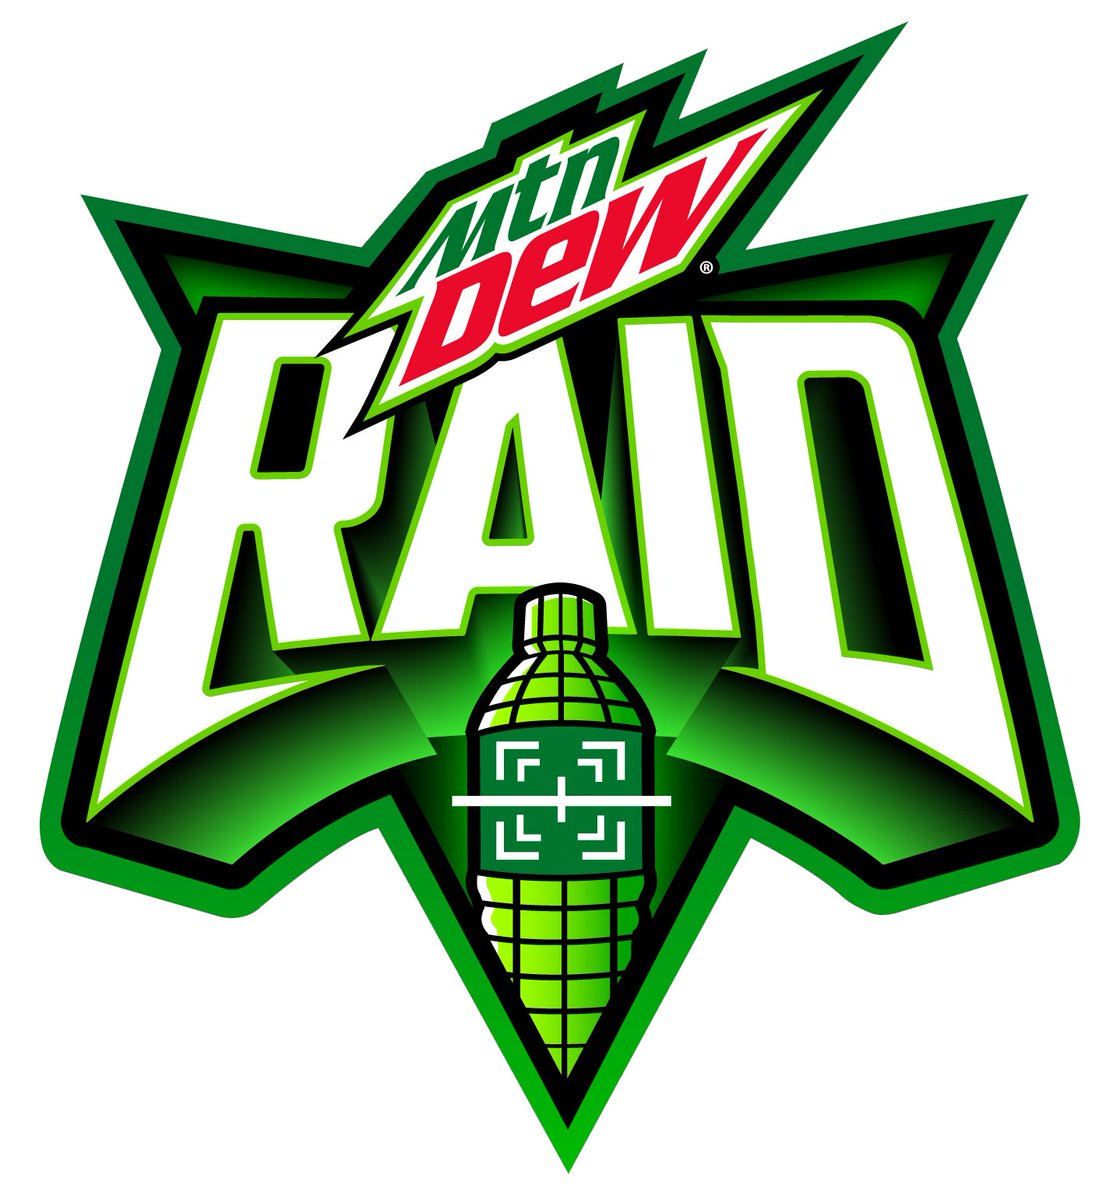 Live today in partnership with @MtnDewGaming ! Join in and see how you
can be featured in the MTN DEW RAID! Catch me @ 3PM CT!

Must be 18+ and live in the US to participate.

#MTNDEWGAMING
#DEWPARTNER #AD